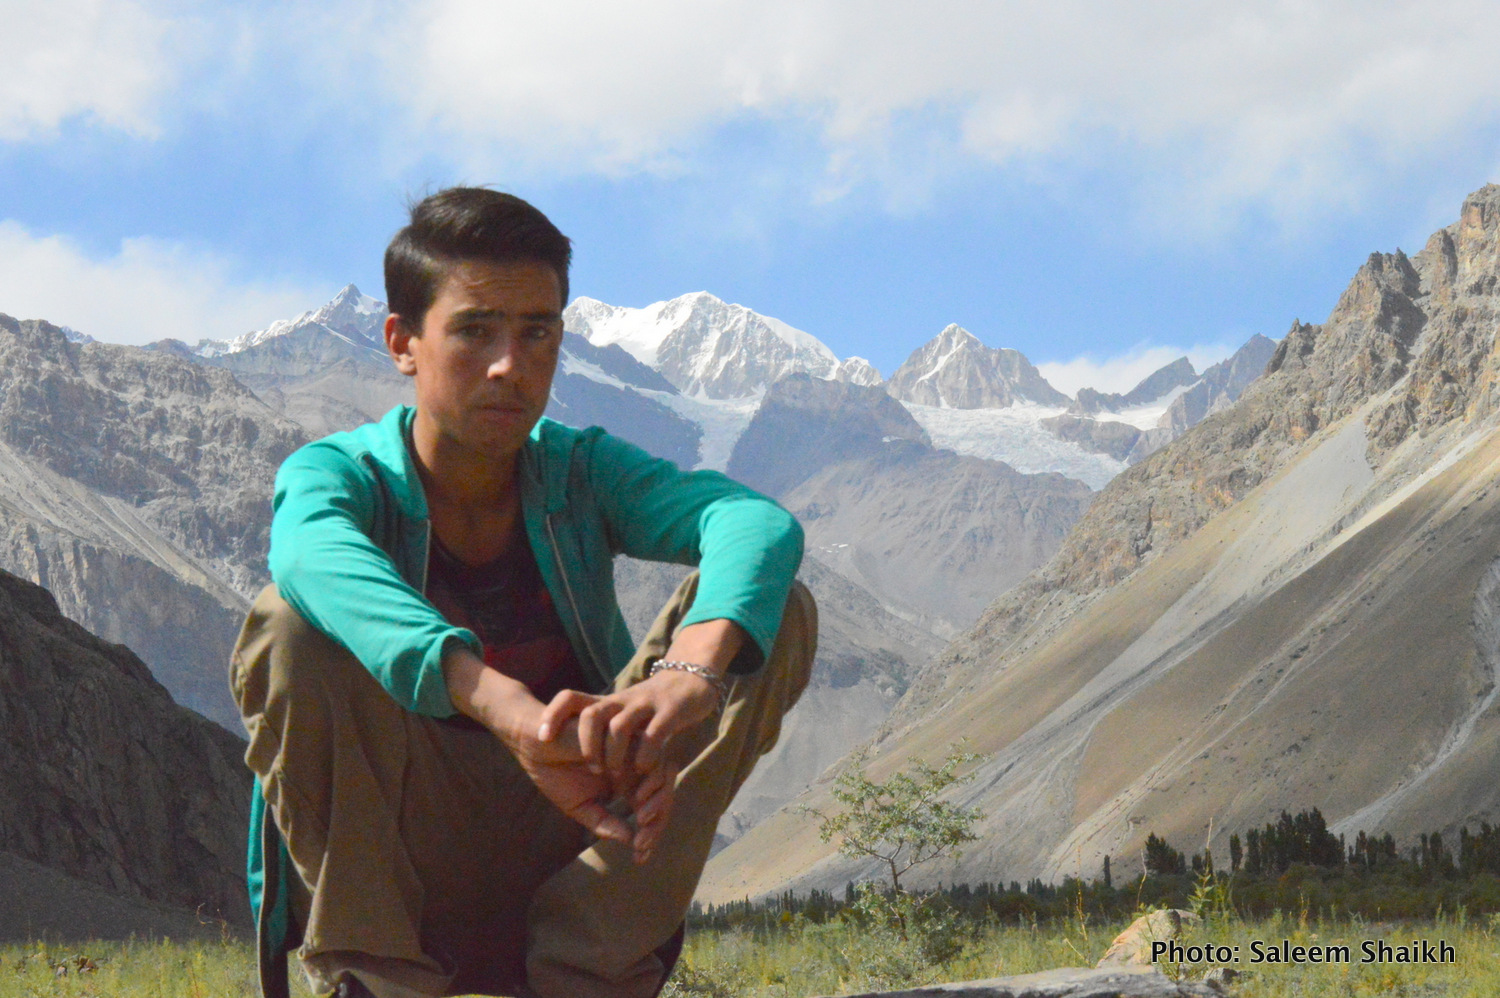 A young boy sits over a big boulder past overlooking Karakoram glaciers in scenic Darkut valley, some 103 miles from Gilgit –capital of Gilgit-Baltistan region. His account paints another grim picture. The devastating flood in 2010 devastating large-scale farm fields and homes, forcing over 100 families to migrat to nearby Ghakuch and Gilgit towns in search of livelihoods. Photo credit: Saleem Shaikh